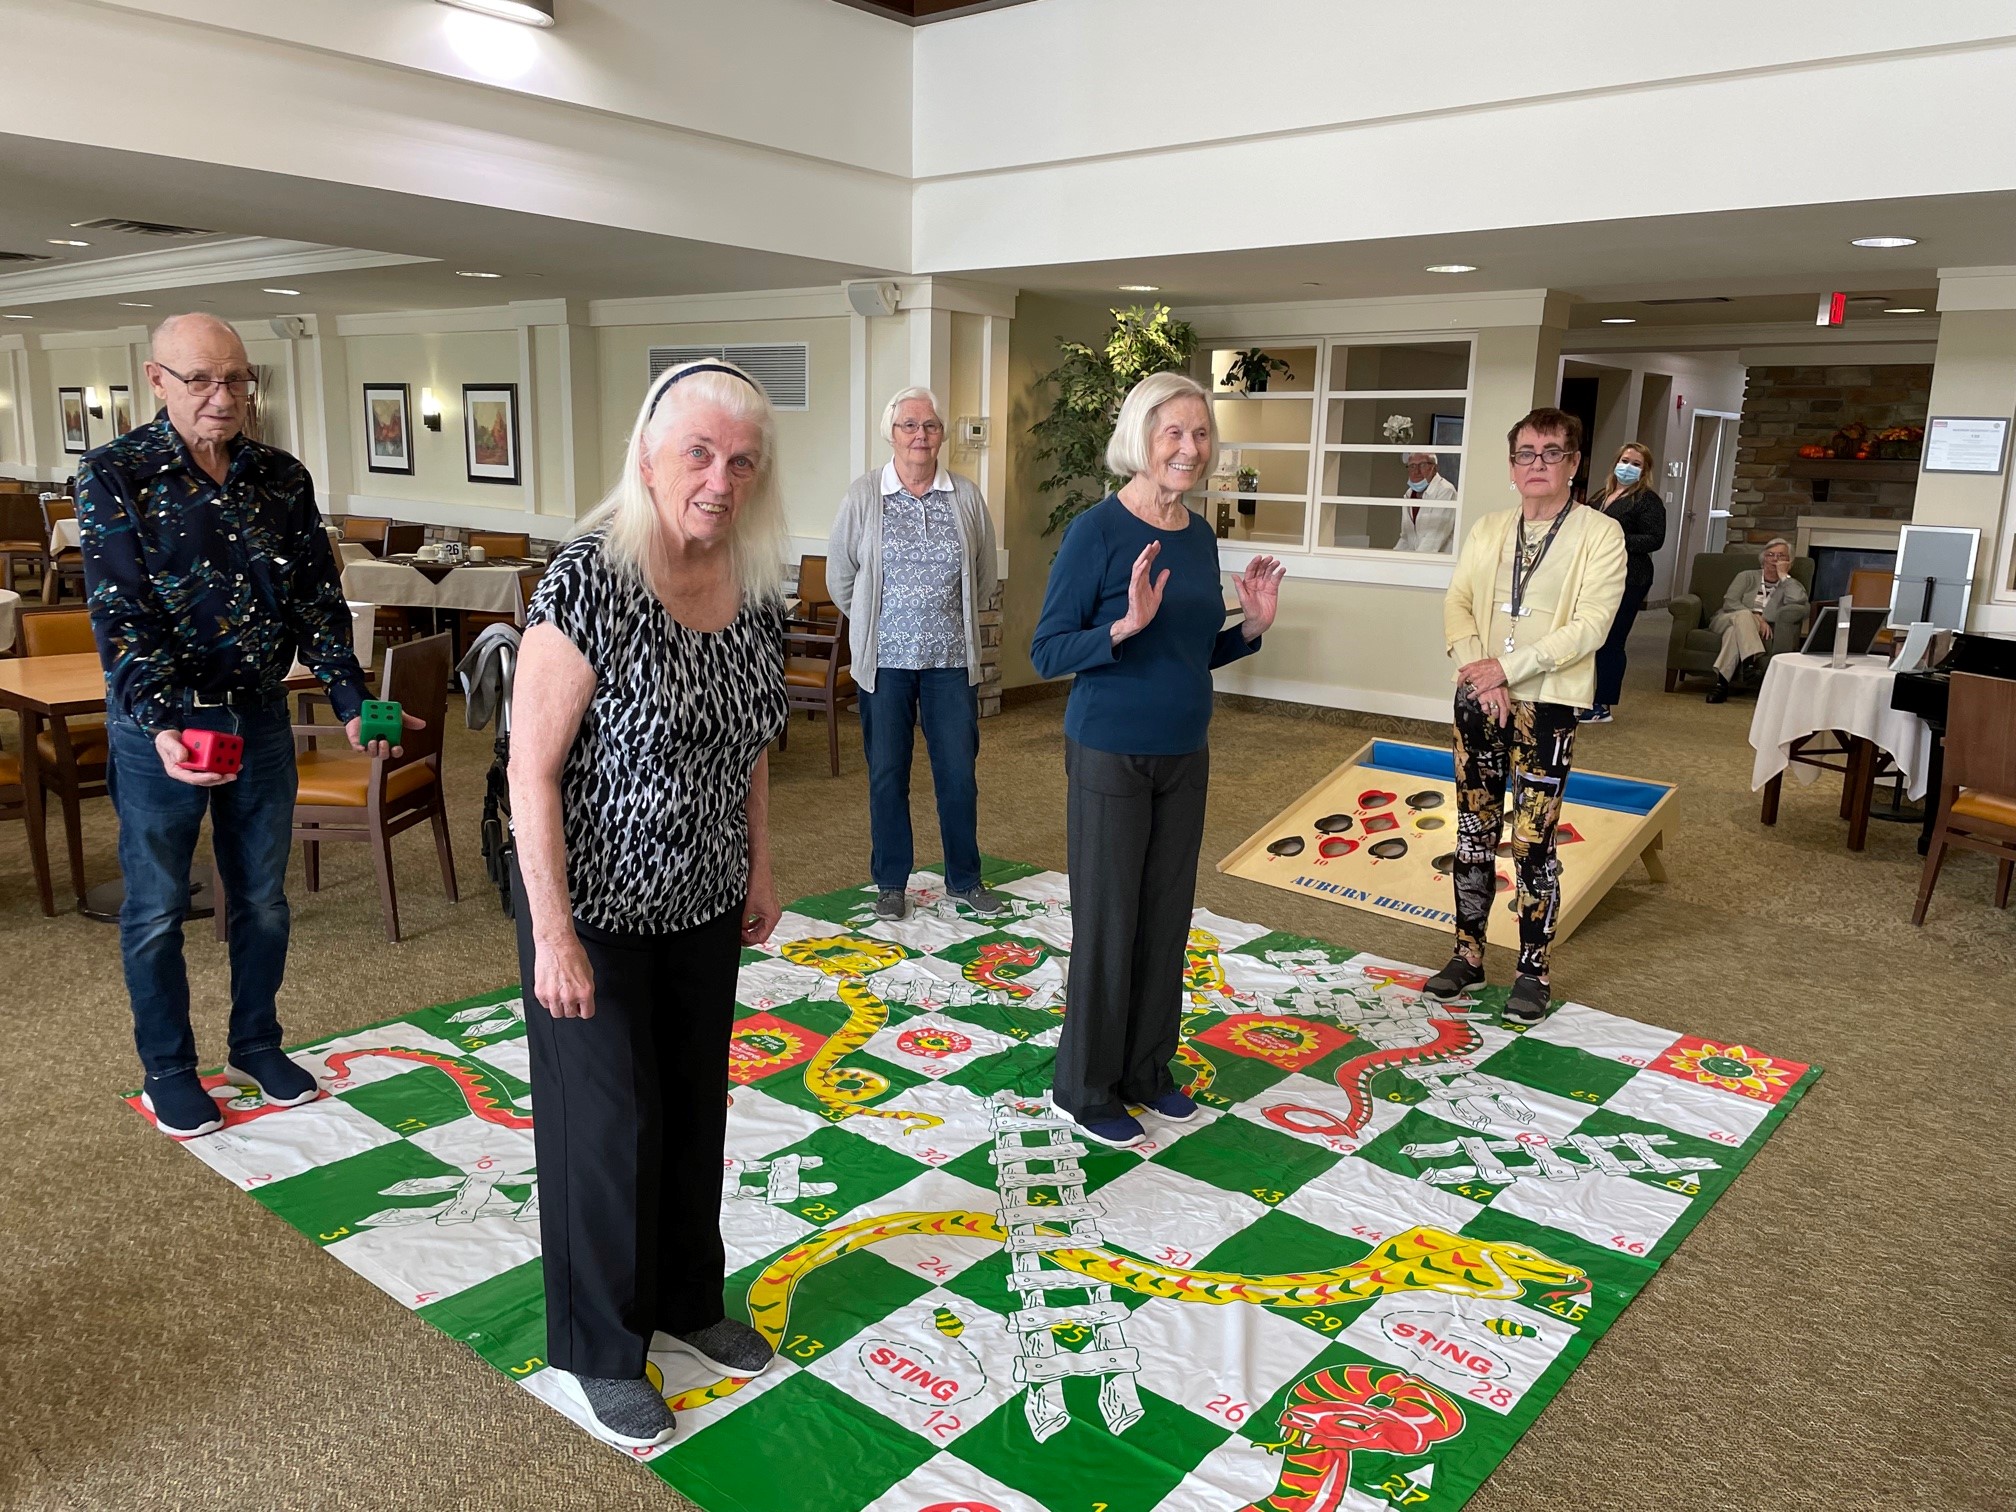 64 Top Games for Seniors and the Elderly: Fun for All Abilities